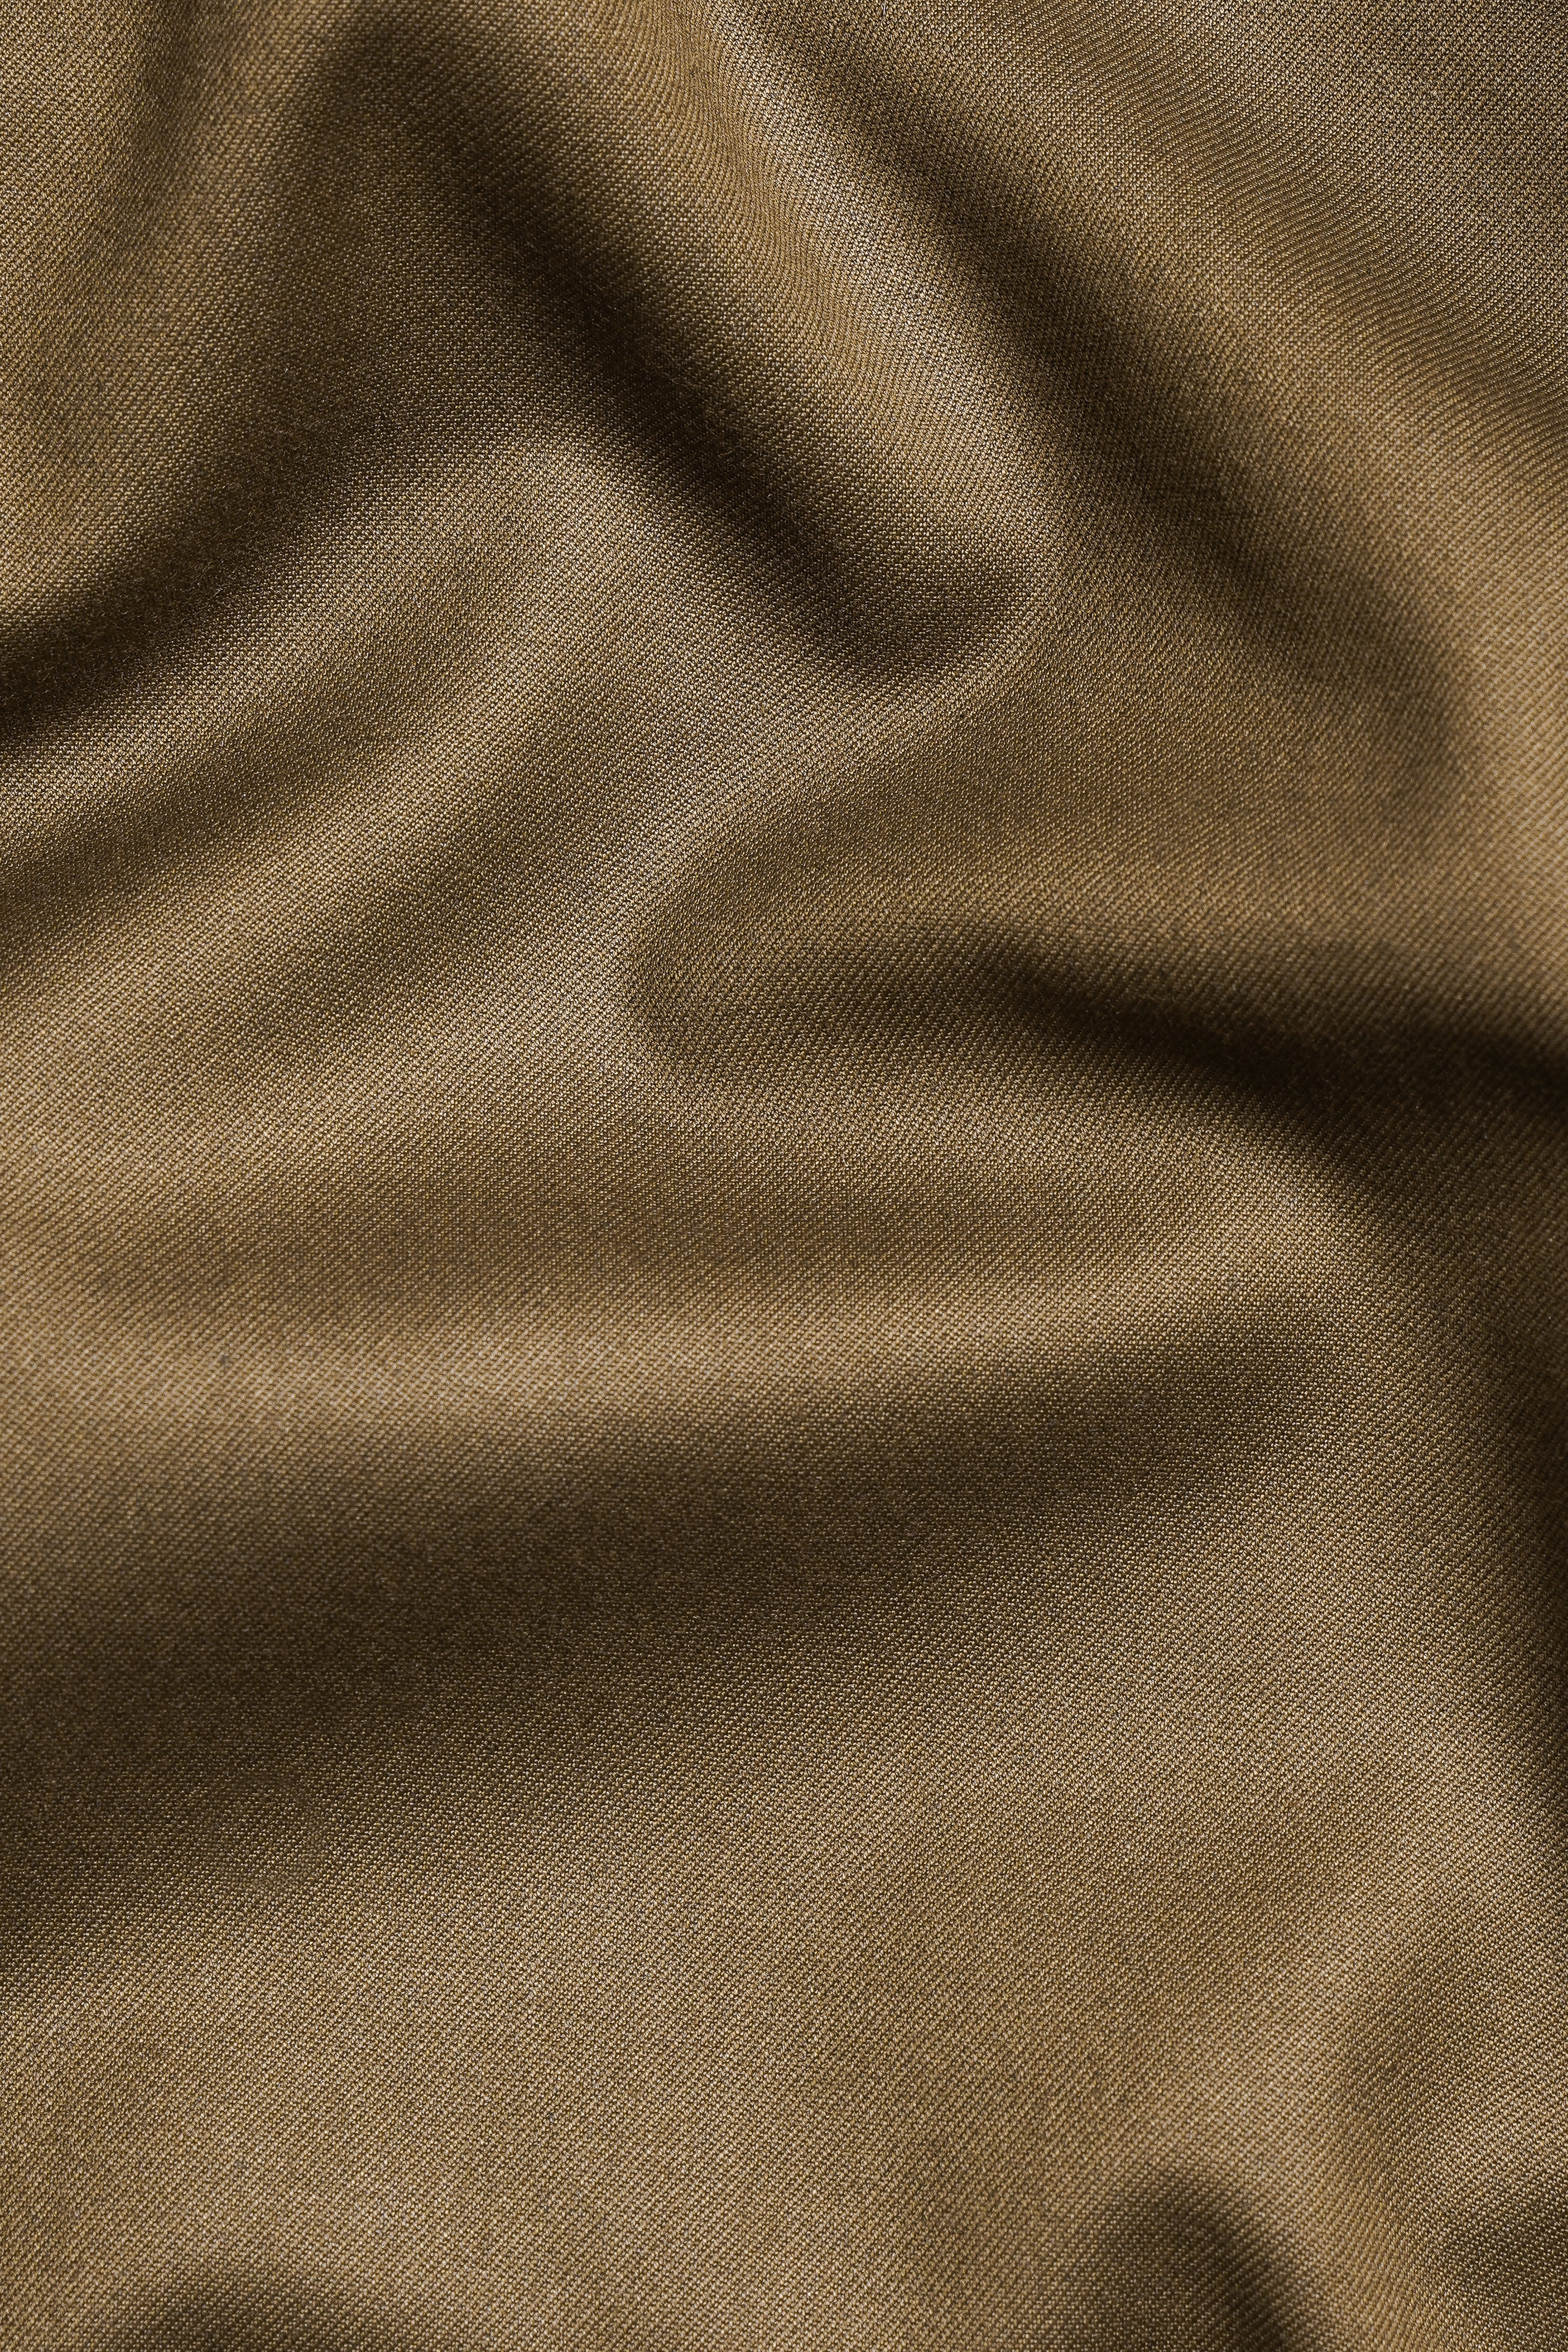 Tortilla Brown Wool Rich Single Breasted Blazer BL3068-SB-36, BL3068-SB-38, BL3068-SB-40, BL3068-SB-42, BL3068-SB-44, BL3068-SB-46, BL3068-SB-48, BL3068-SB-50, BL3068-SB-52, BL3068-SB-54, BL3068-SB-56, BL3068-SB-58, BL3068-SB-60